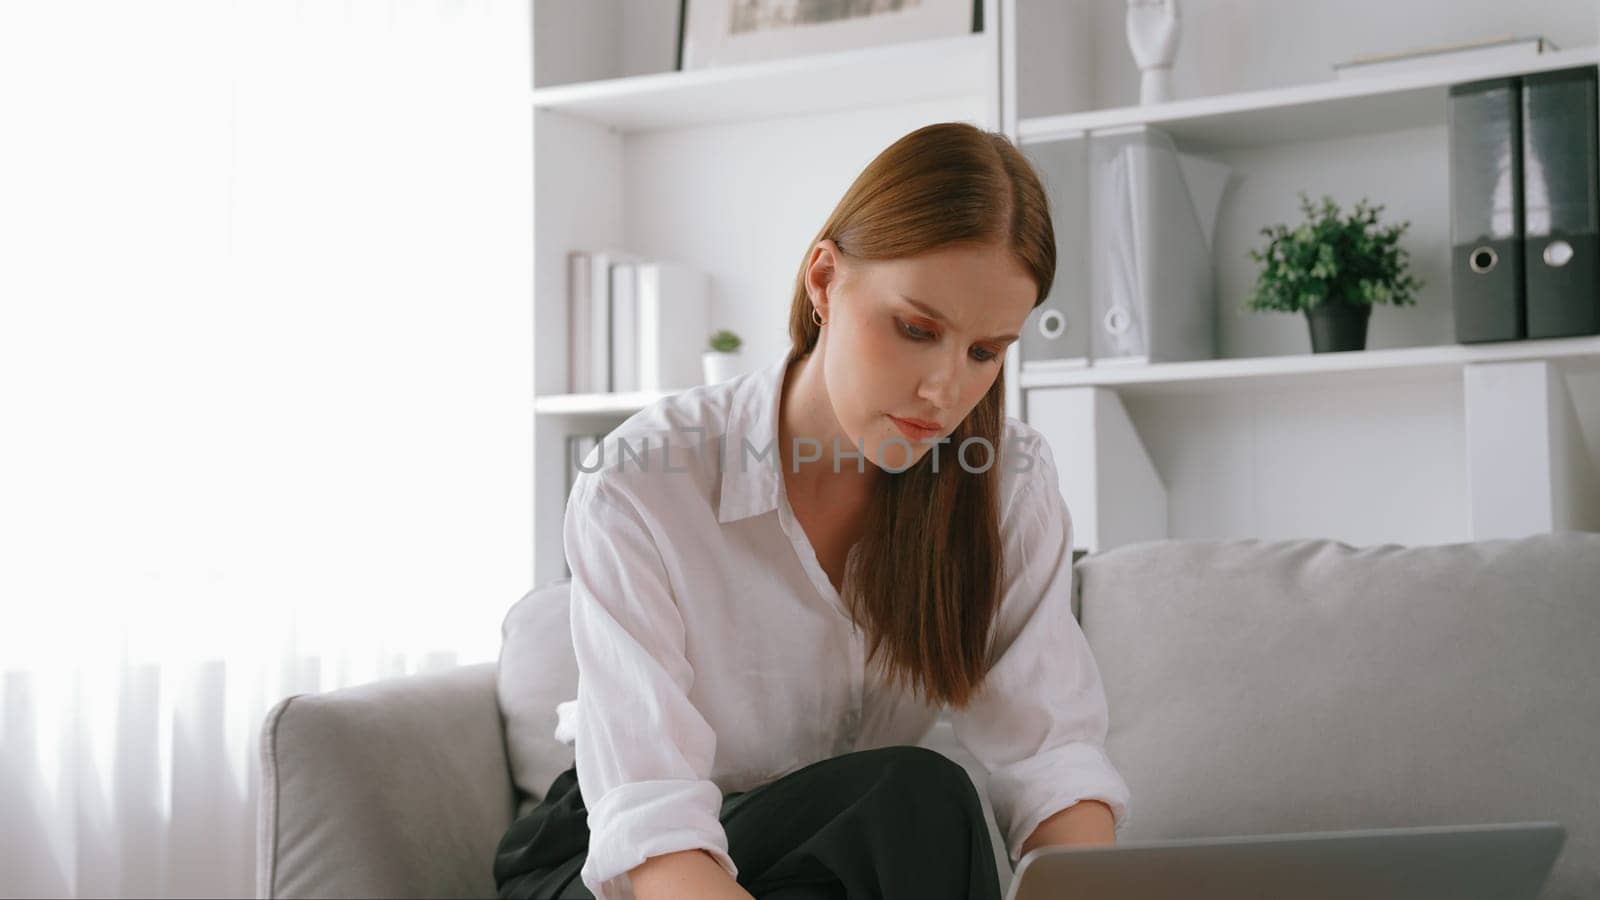 Young businesswoman sitting on the crouch using laptop computer for prim work on internet. Secretary or online content writing working at home. Remote working in domestic lifestyle